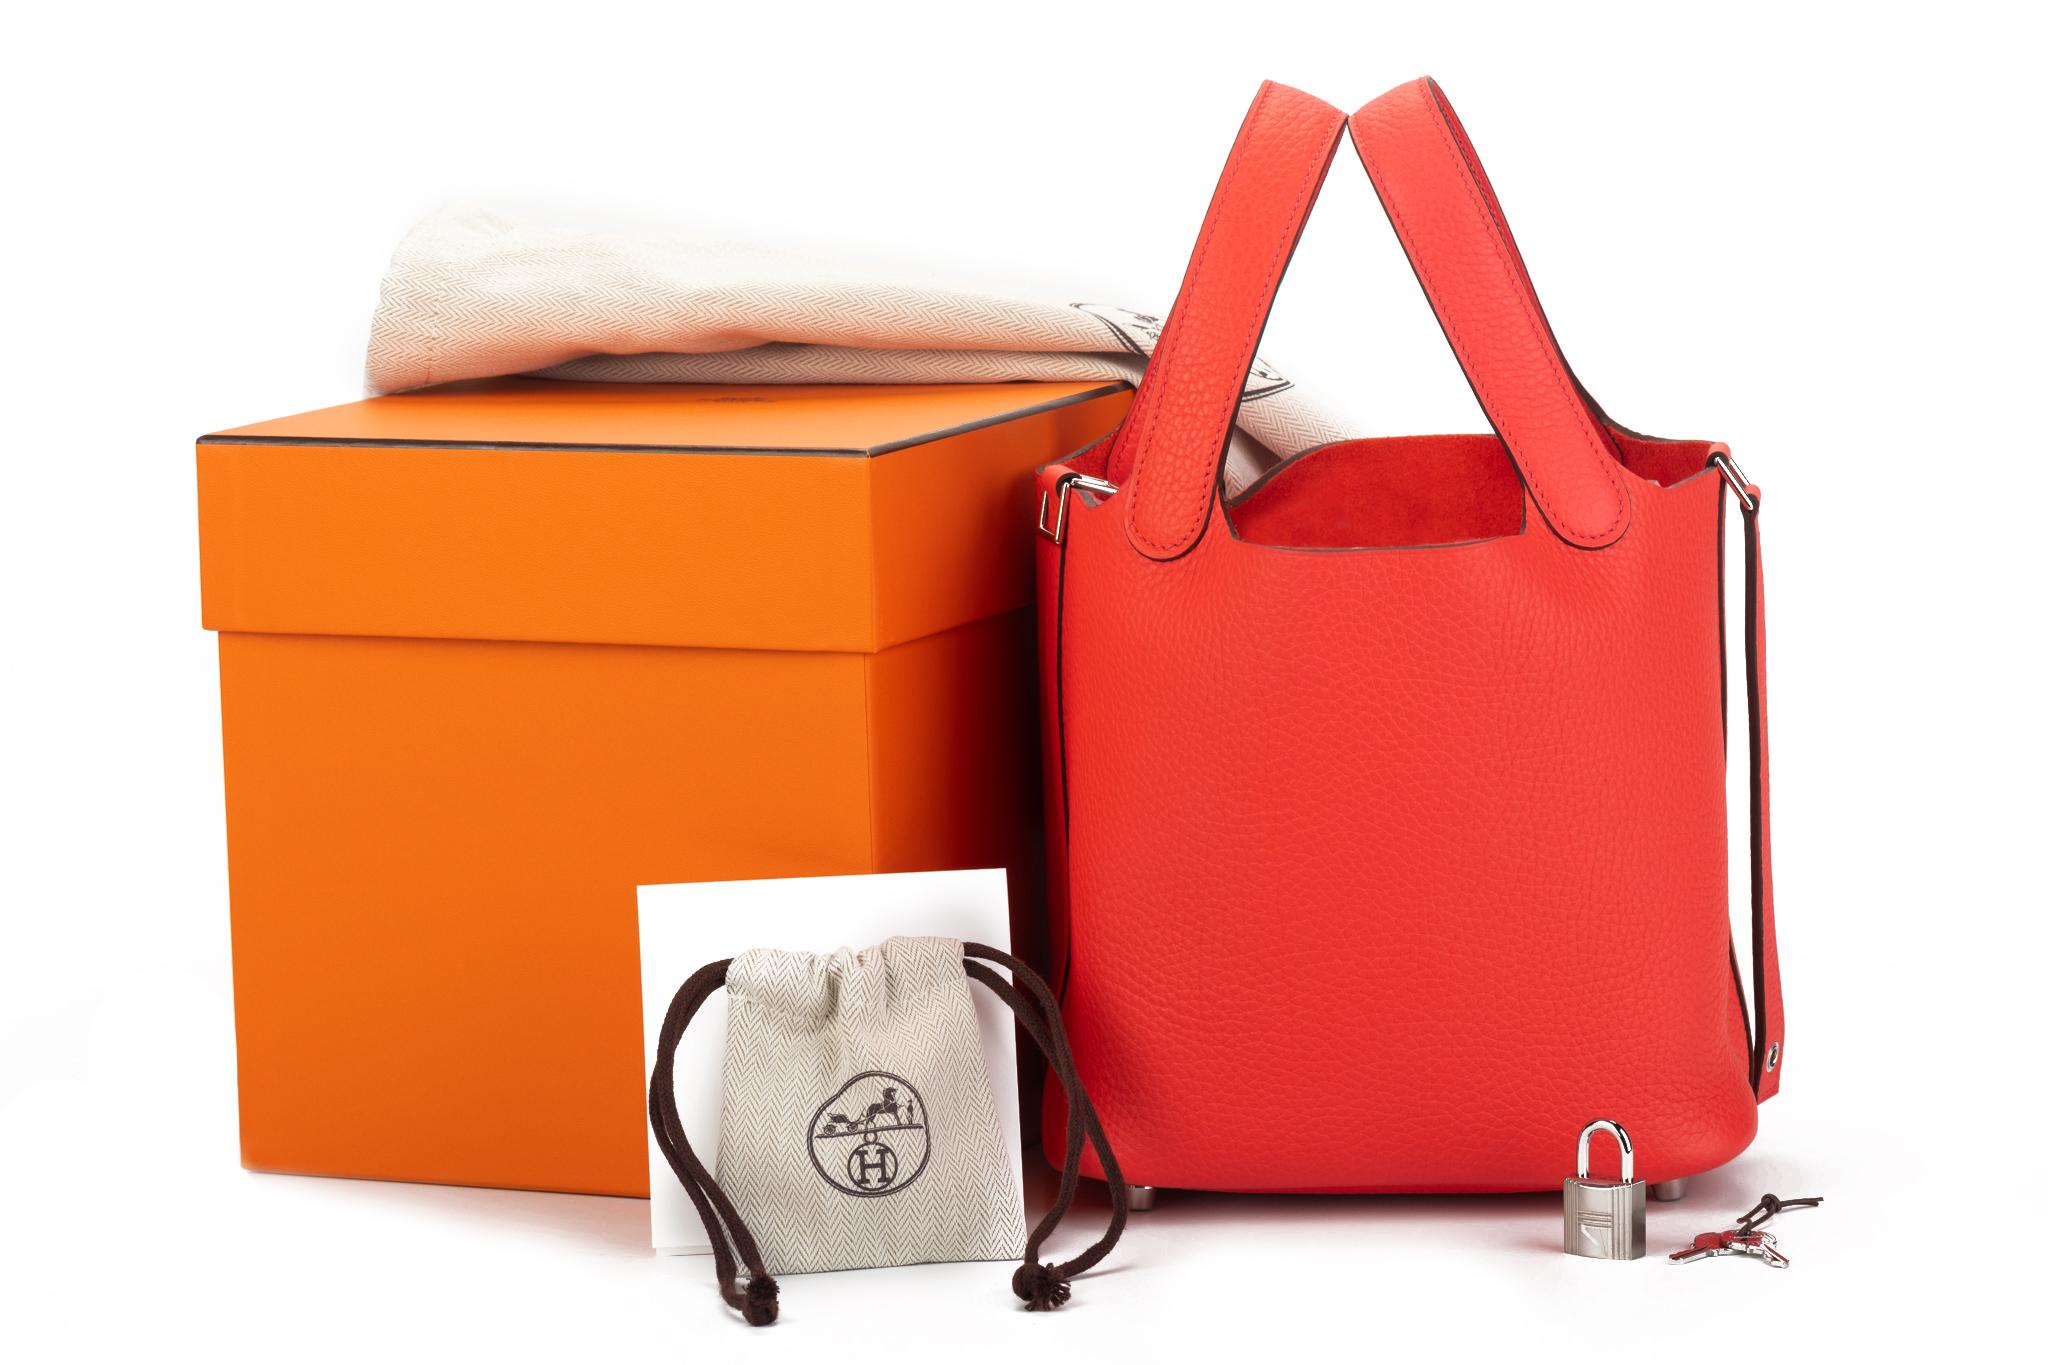 Hermès brand new in box collectible rose texas taurillon clemence leather picotin 18cm. Palladium hardware. Date stamp Y for 2020. Comes with original dust cover, booklet, box, and ribbon.